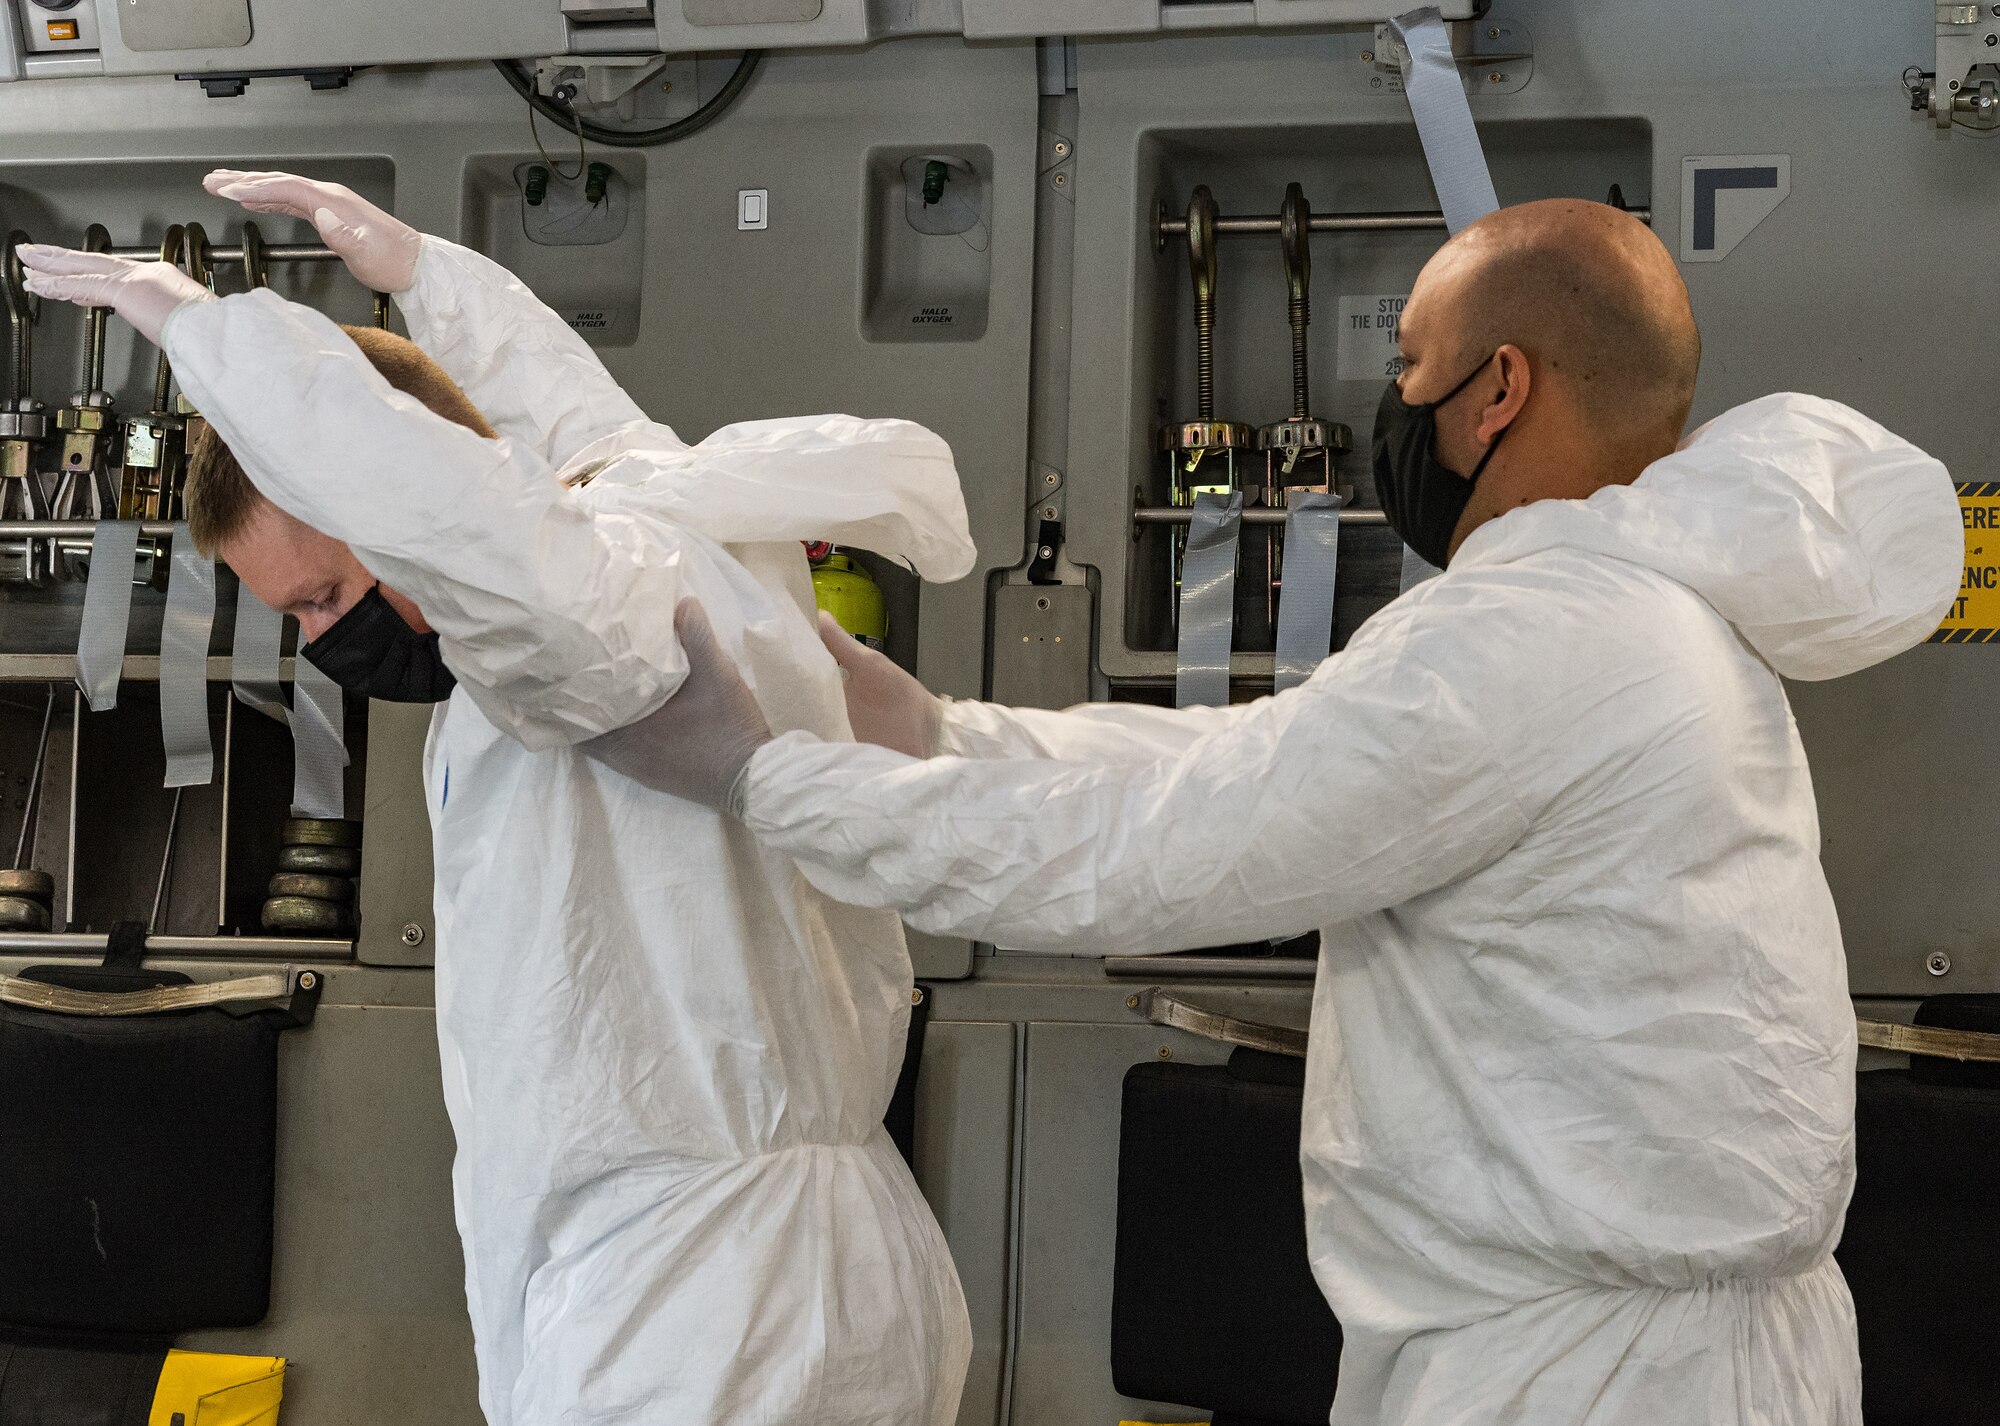 Master Sgt. Leonardo Erazo, 5th Health Care Operations Squadron medical logistics flight chief, checks the personal protective equipment of Staff Sgt. Beau Wilson, 5th HCOS biomedical equipment technician, on Dover Air Force Base, Delaware, April 7, 2021. Both are members of the 775th Expeditionary Aeromedical Evacuation Flight that participated in Negatively Pressurized Conex training on board a C-17 Globemaster III. (U.S. Air Force photo by Roland Balik)